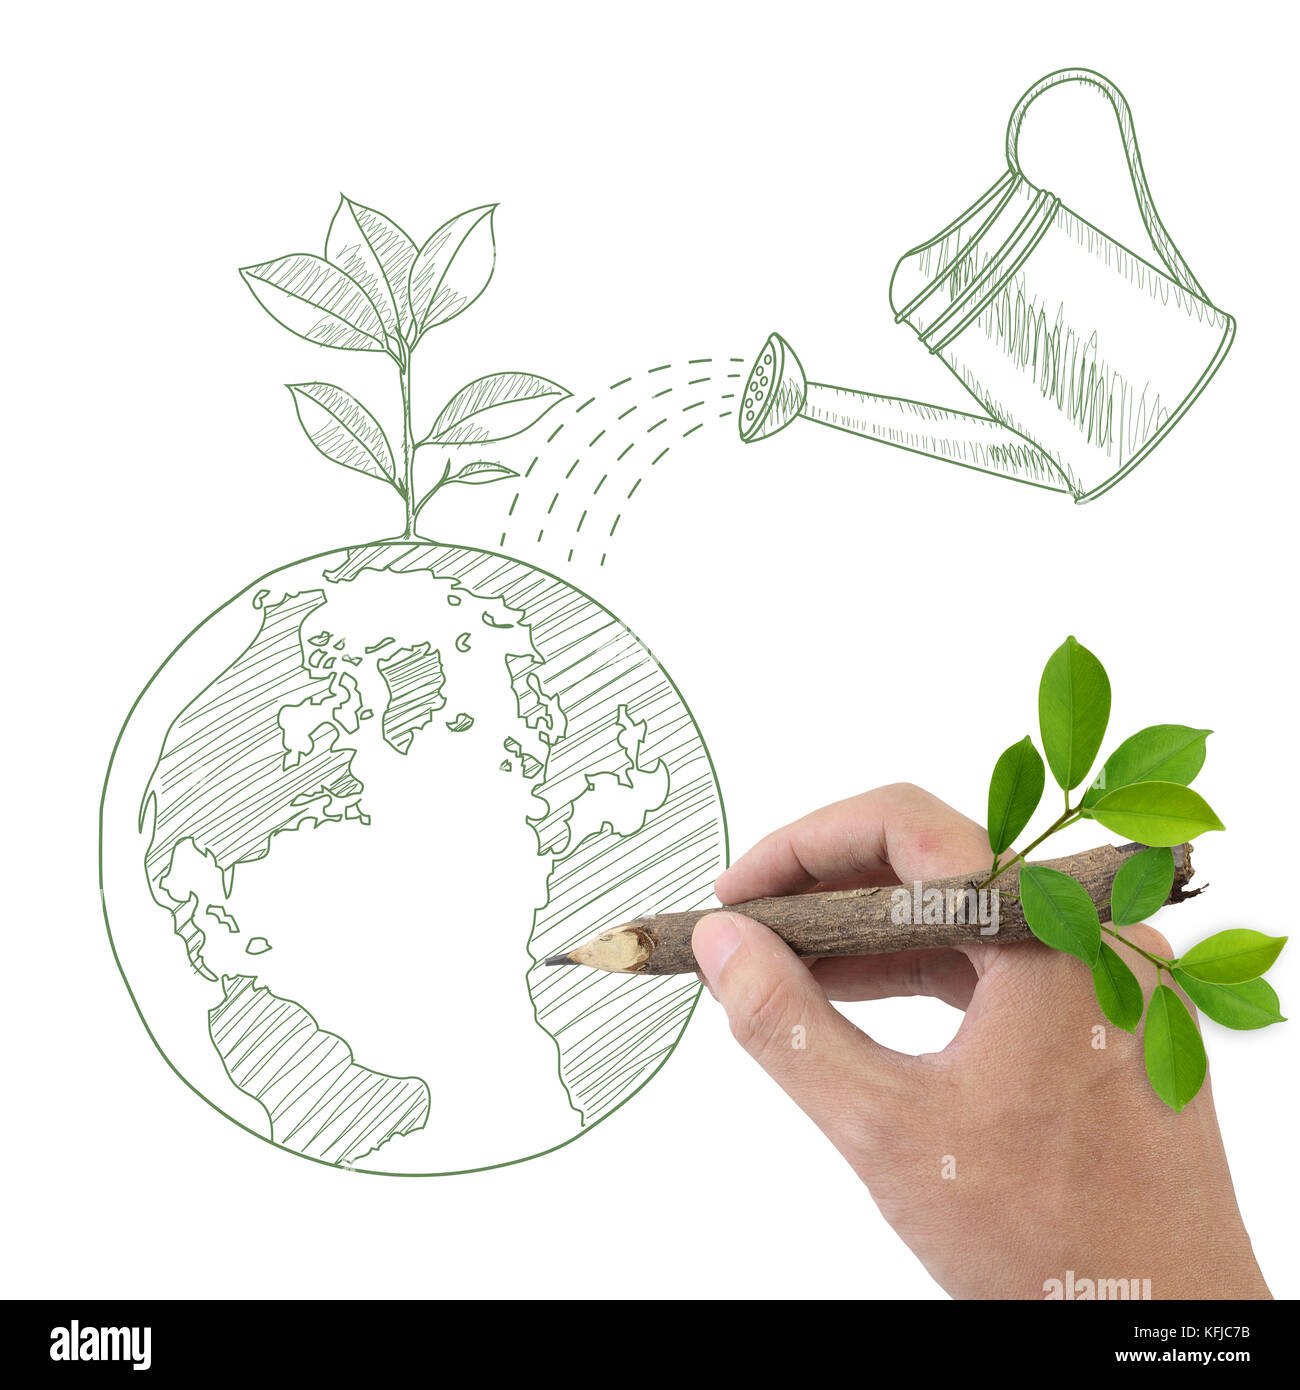 Free Beautiful Earth Day Drawing  Download in PDF Illustrator PSD EPS  SVG JPG PNG  Templatenet